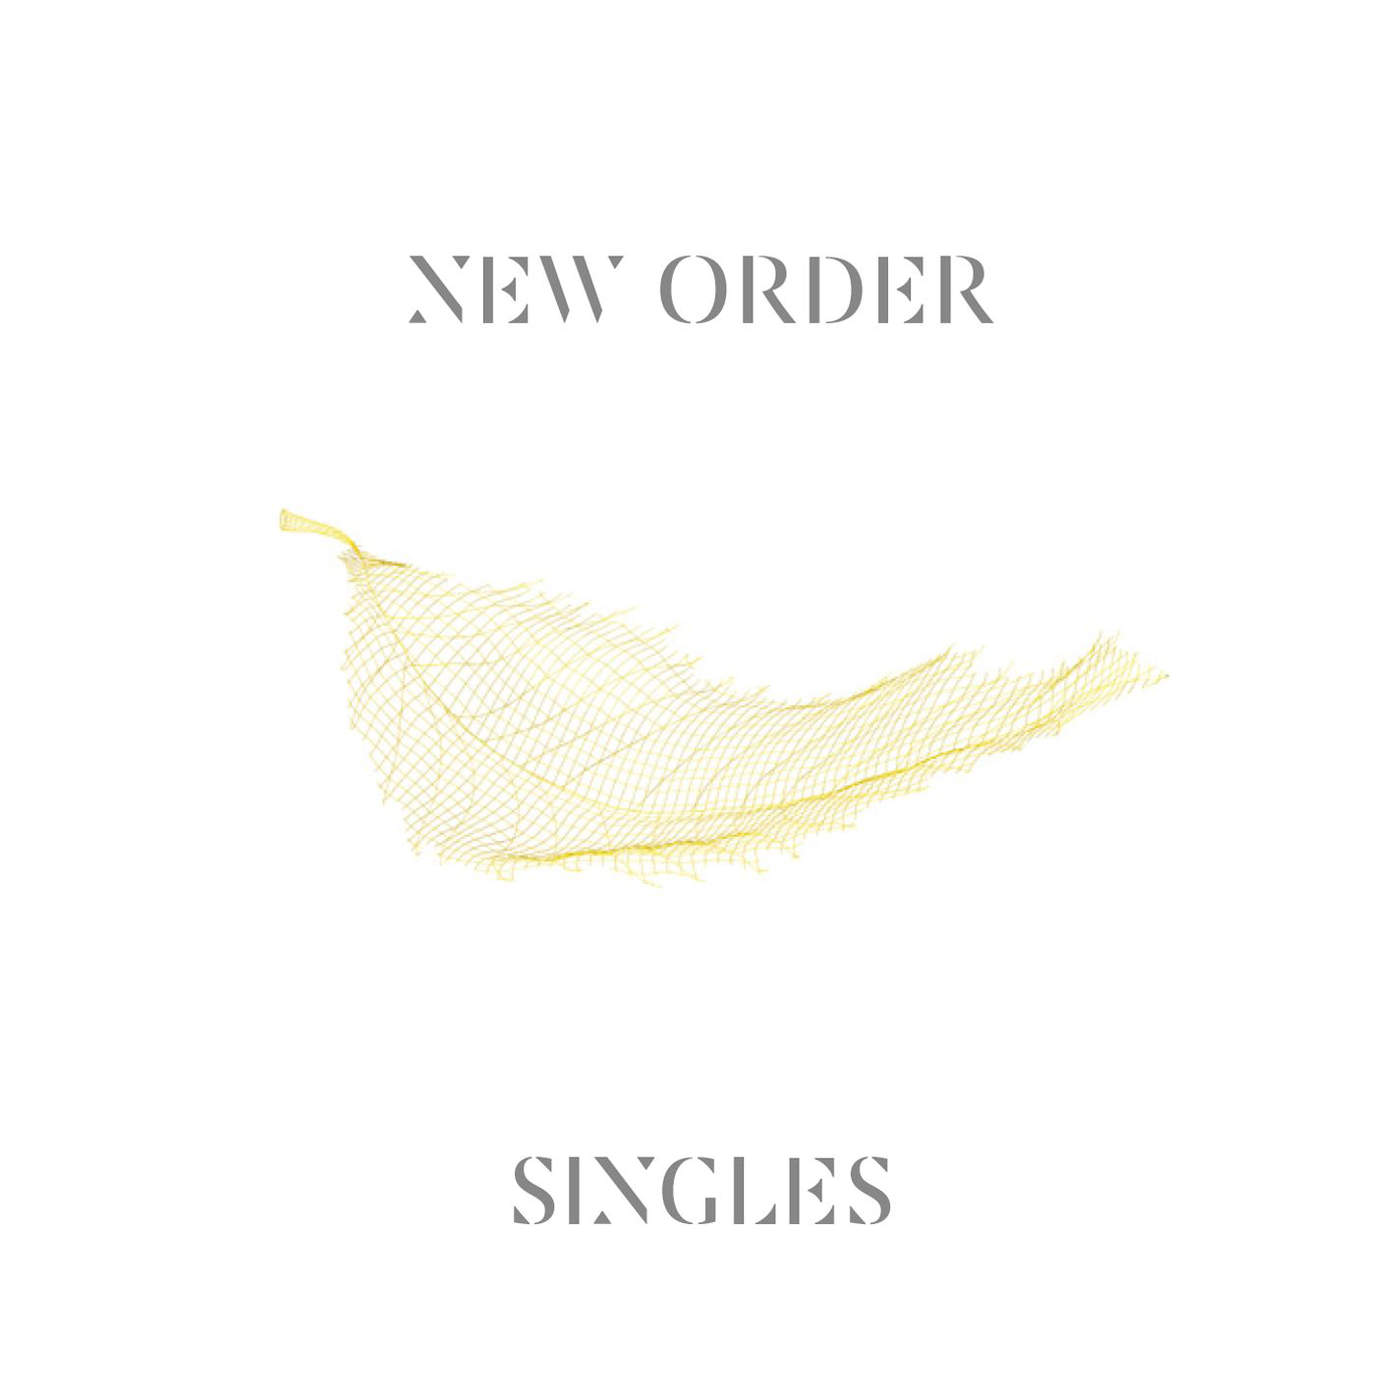 Art for Ceremony by New Order